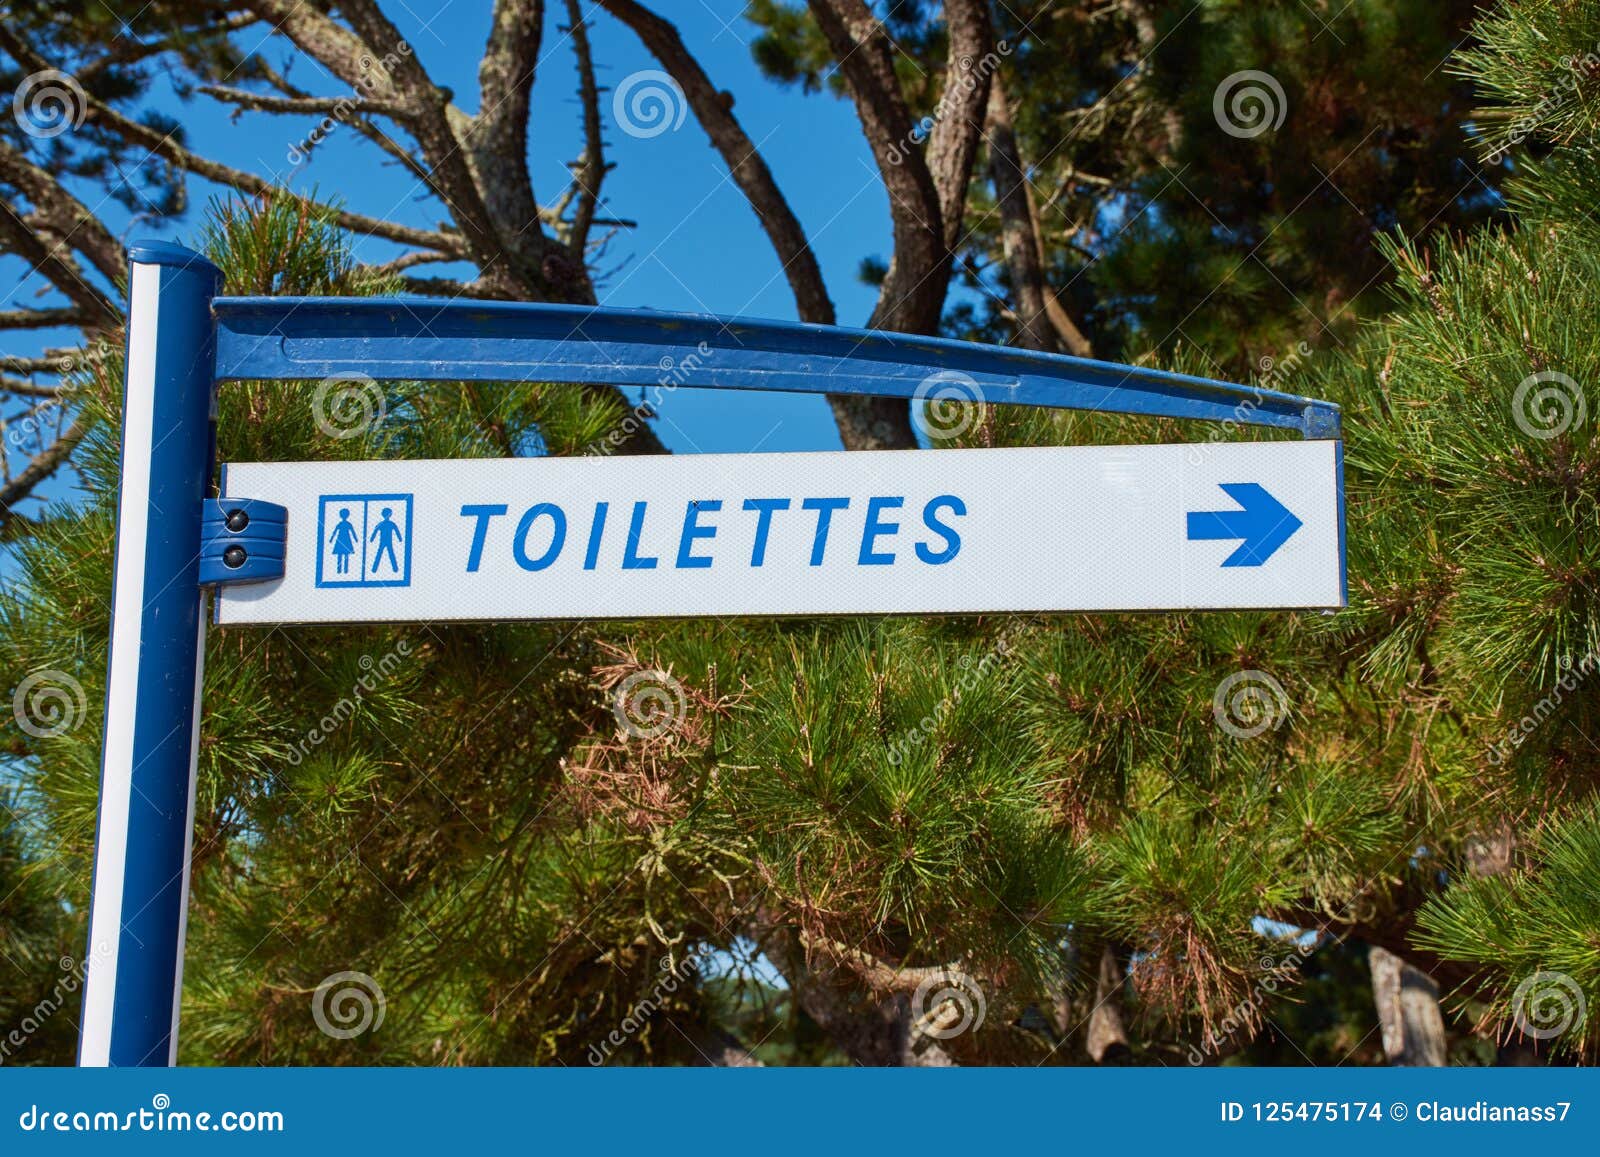 french word `toilettes` means toilet on a direction sign